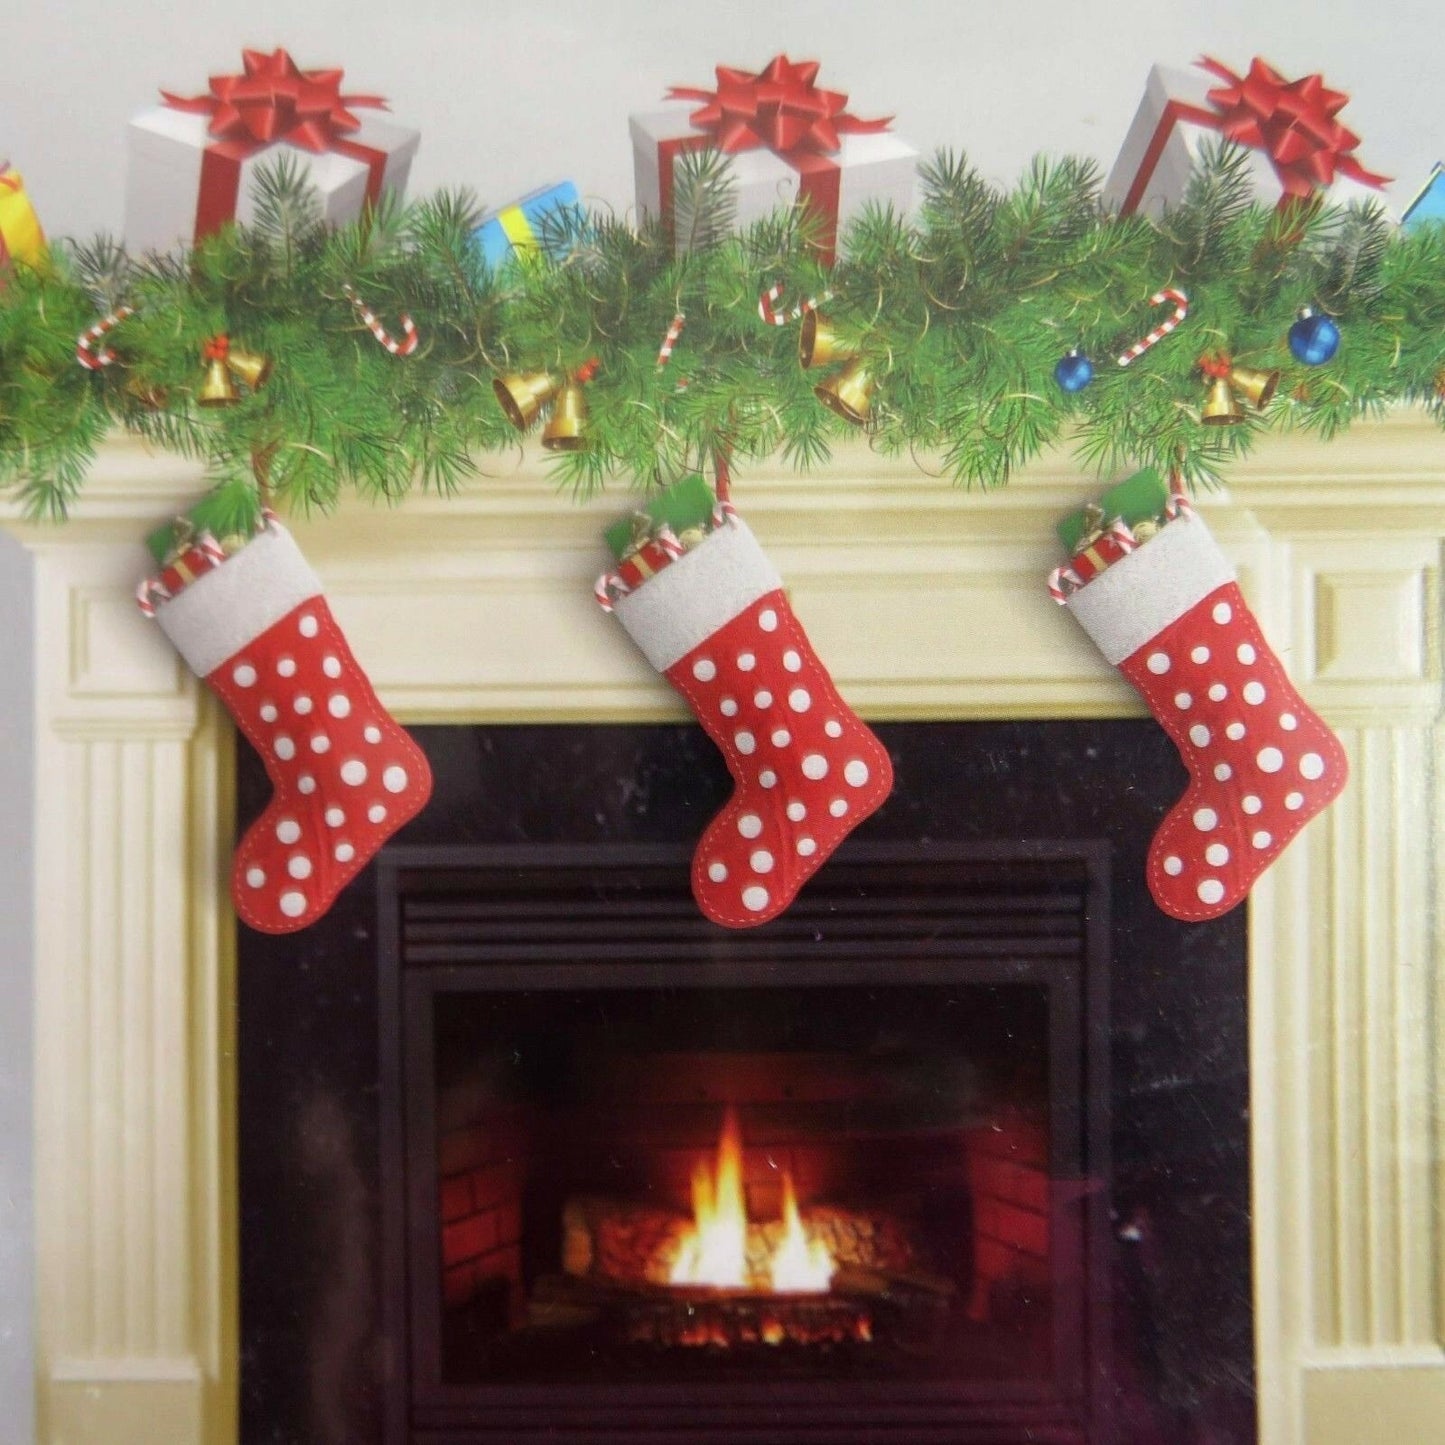 Fireplace Hearth Wall Backdrop Cover Panel Stockings Christmas Holiday Dorm